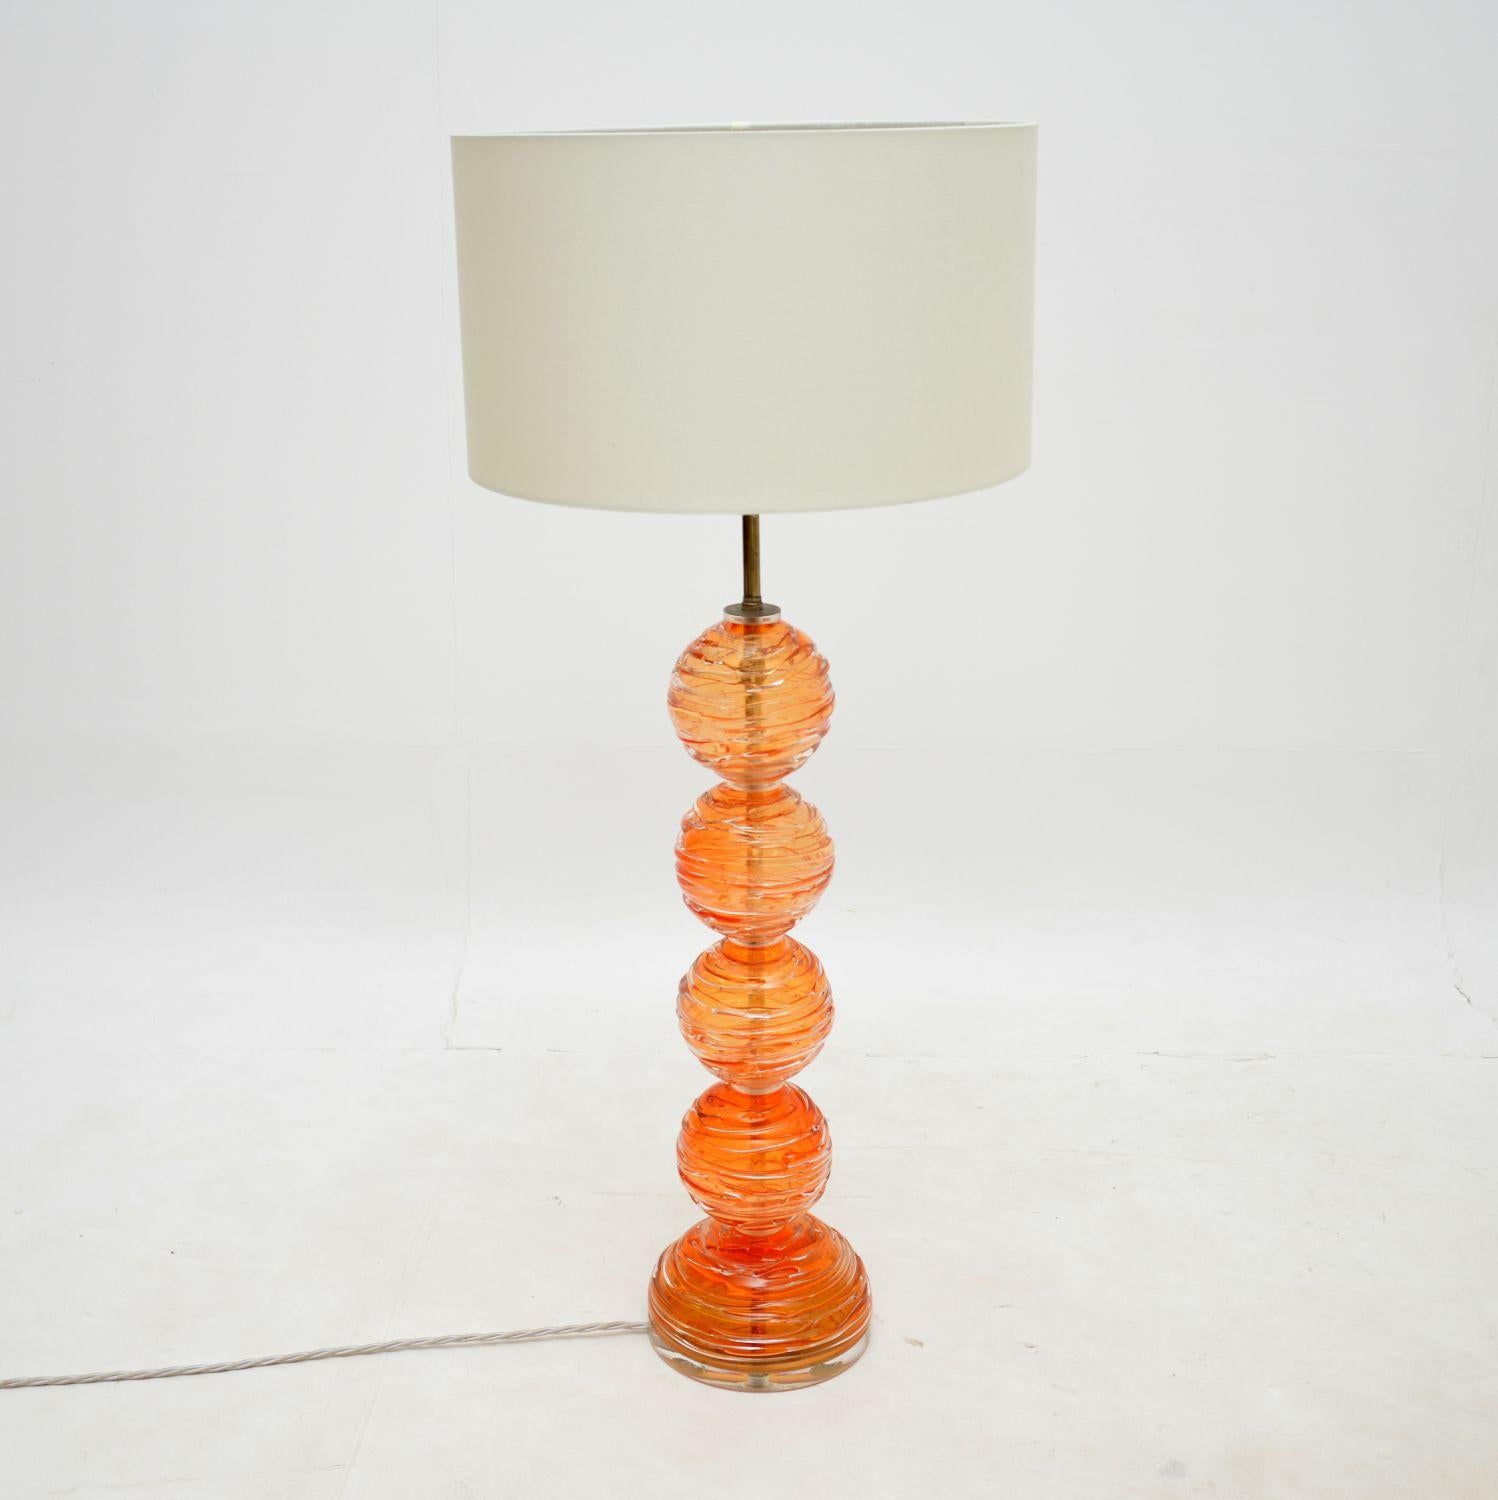 A very large and impressive vintage glass table lamp. This was made in the USA, it dates from around the 1960s-1970s.

The quality is outstanding, with a central column made of beautifully textured orange glass spheres.

The condition is excellent